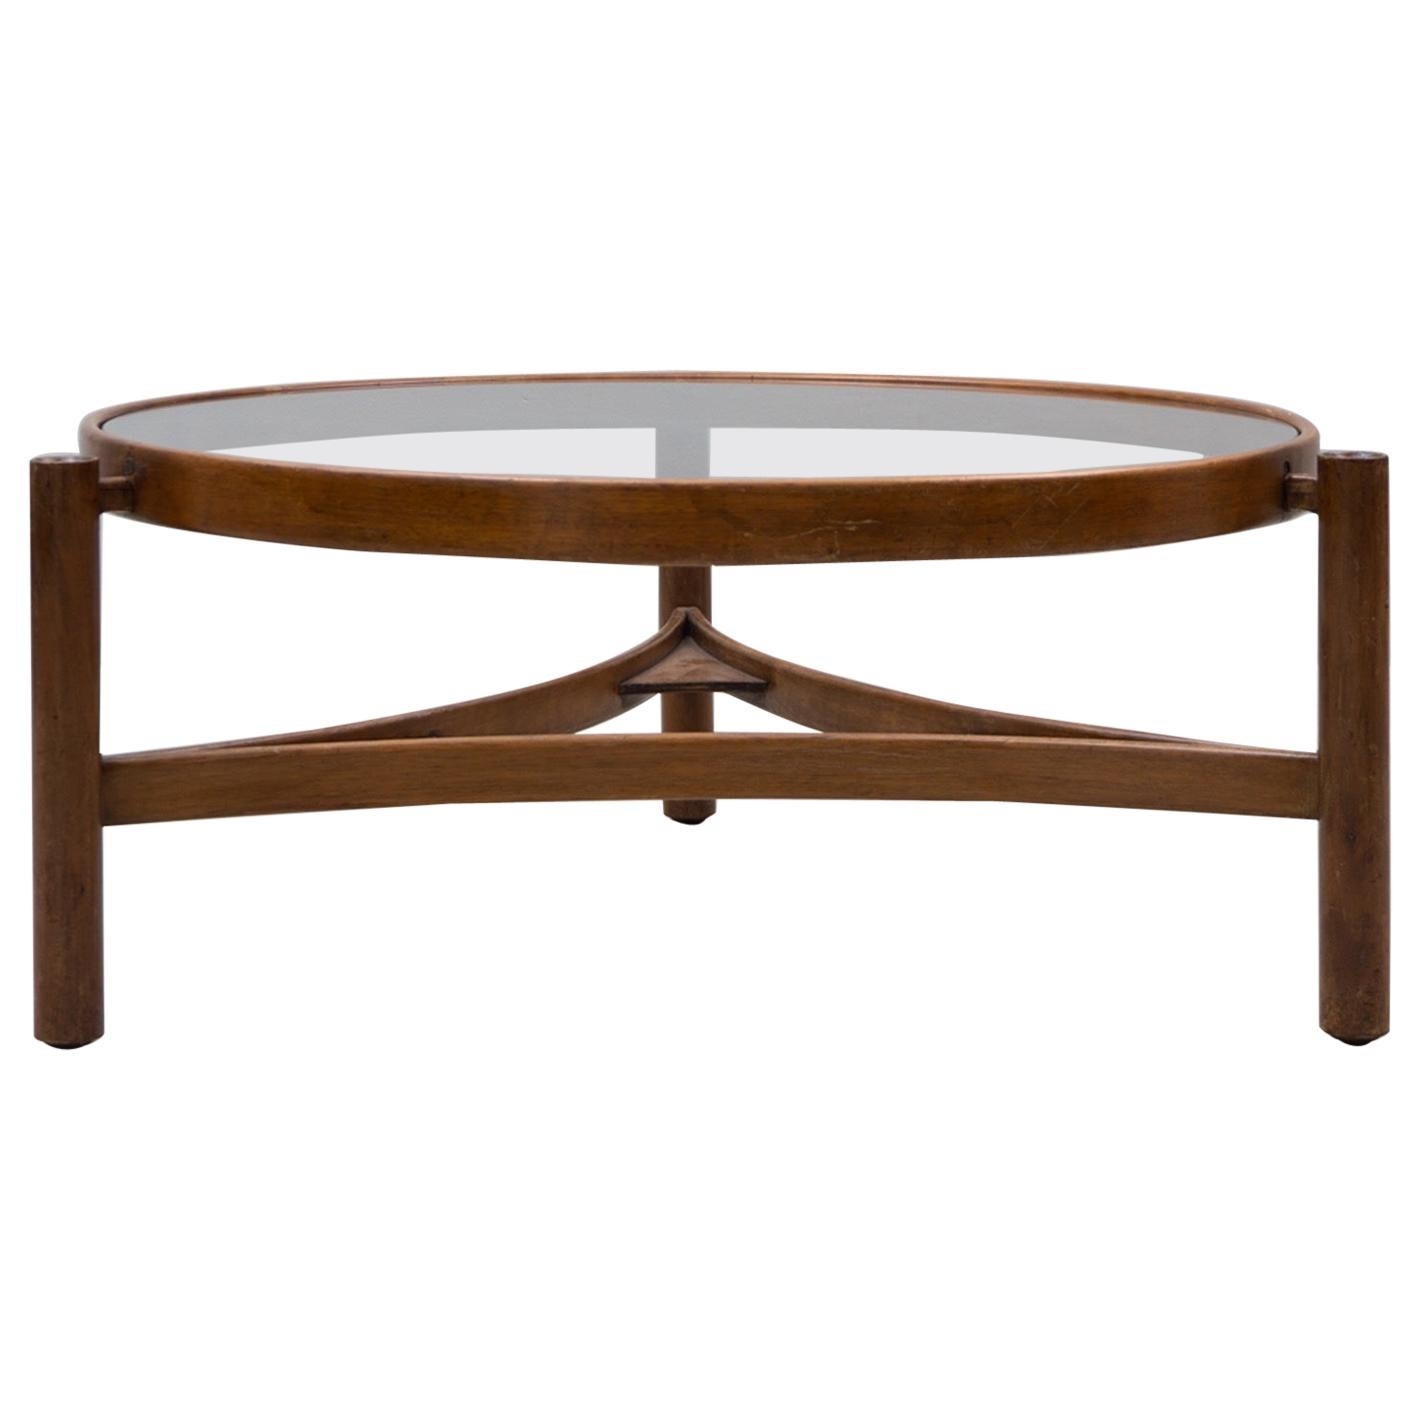 Low Table / Sidetable, Made of Walnut, by Gianfranco Frattini, 1958